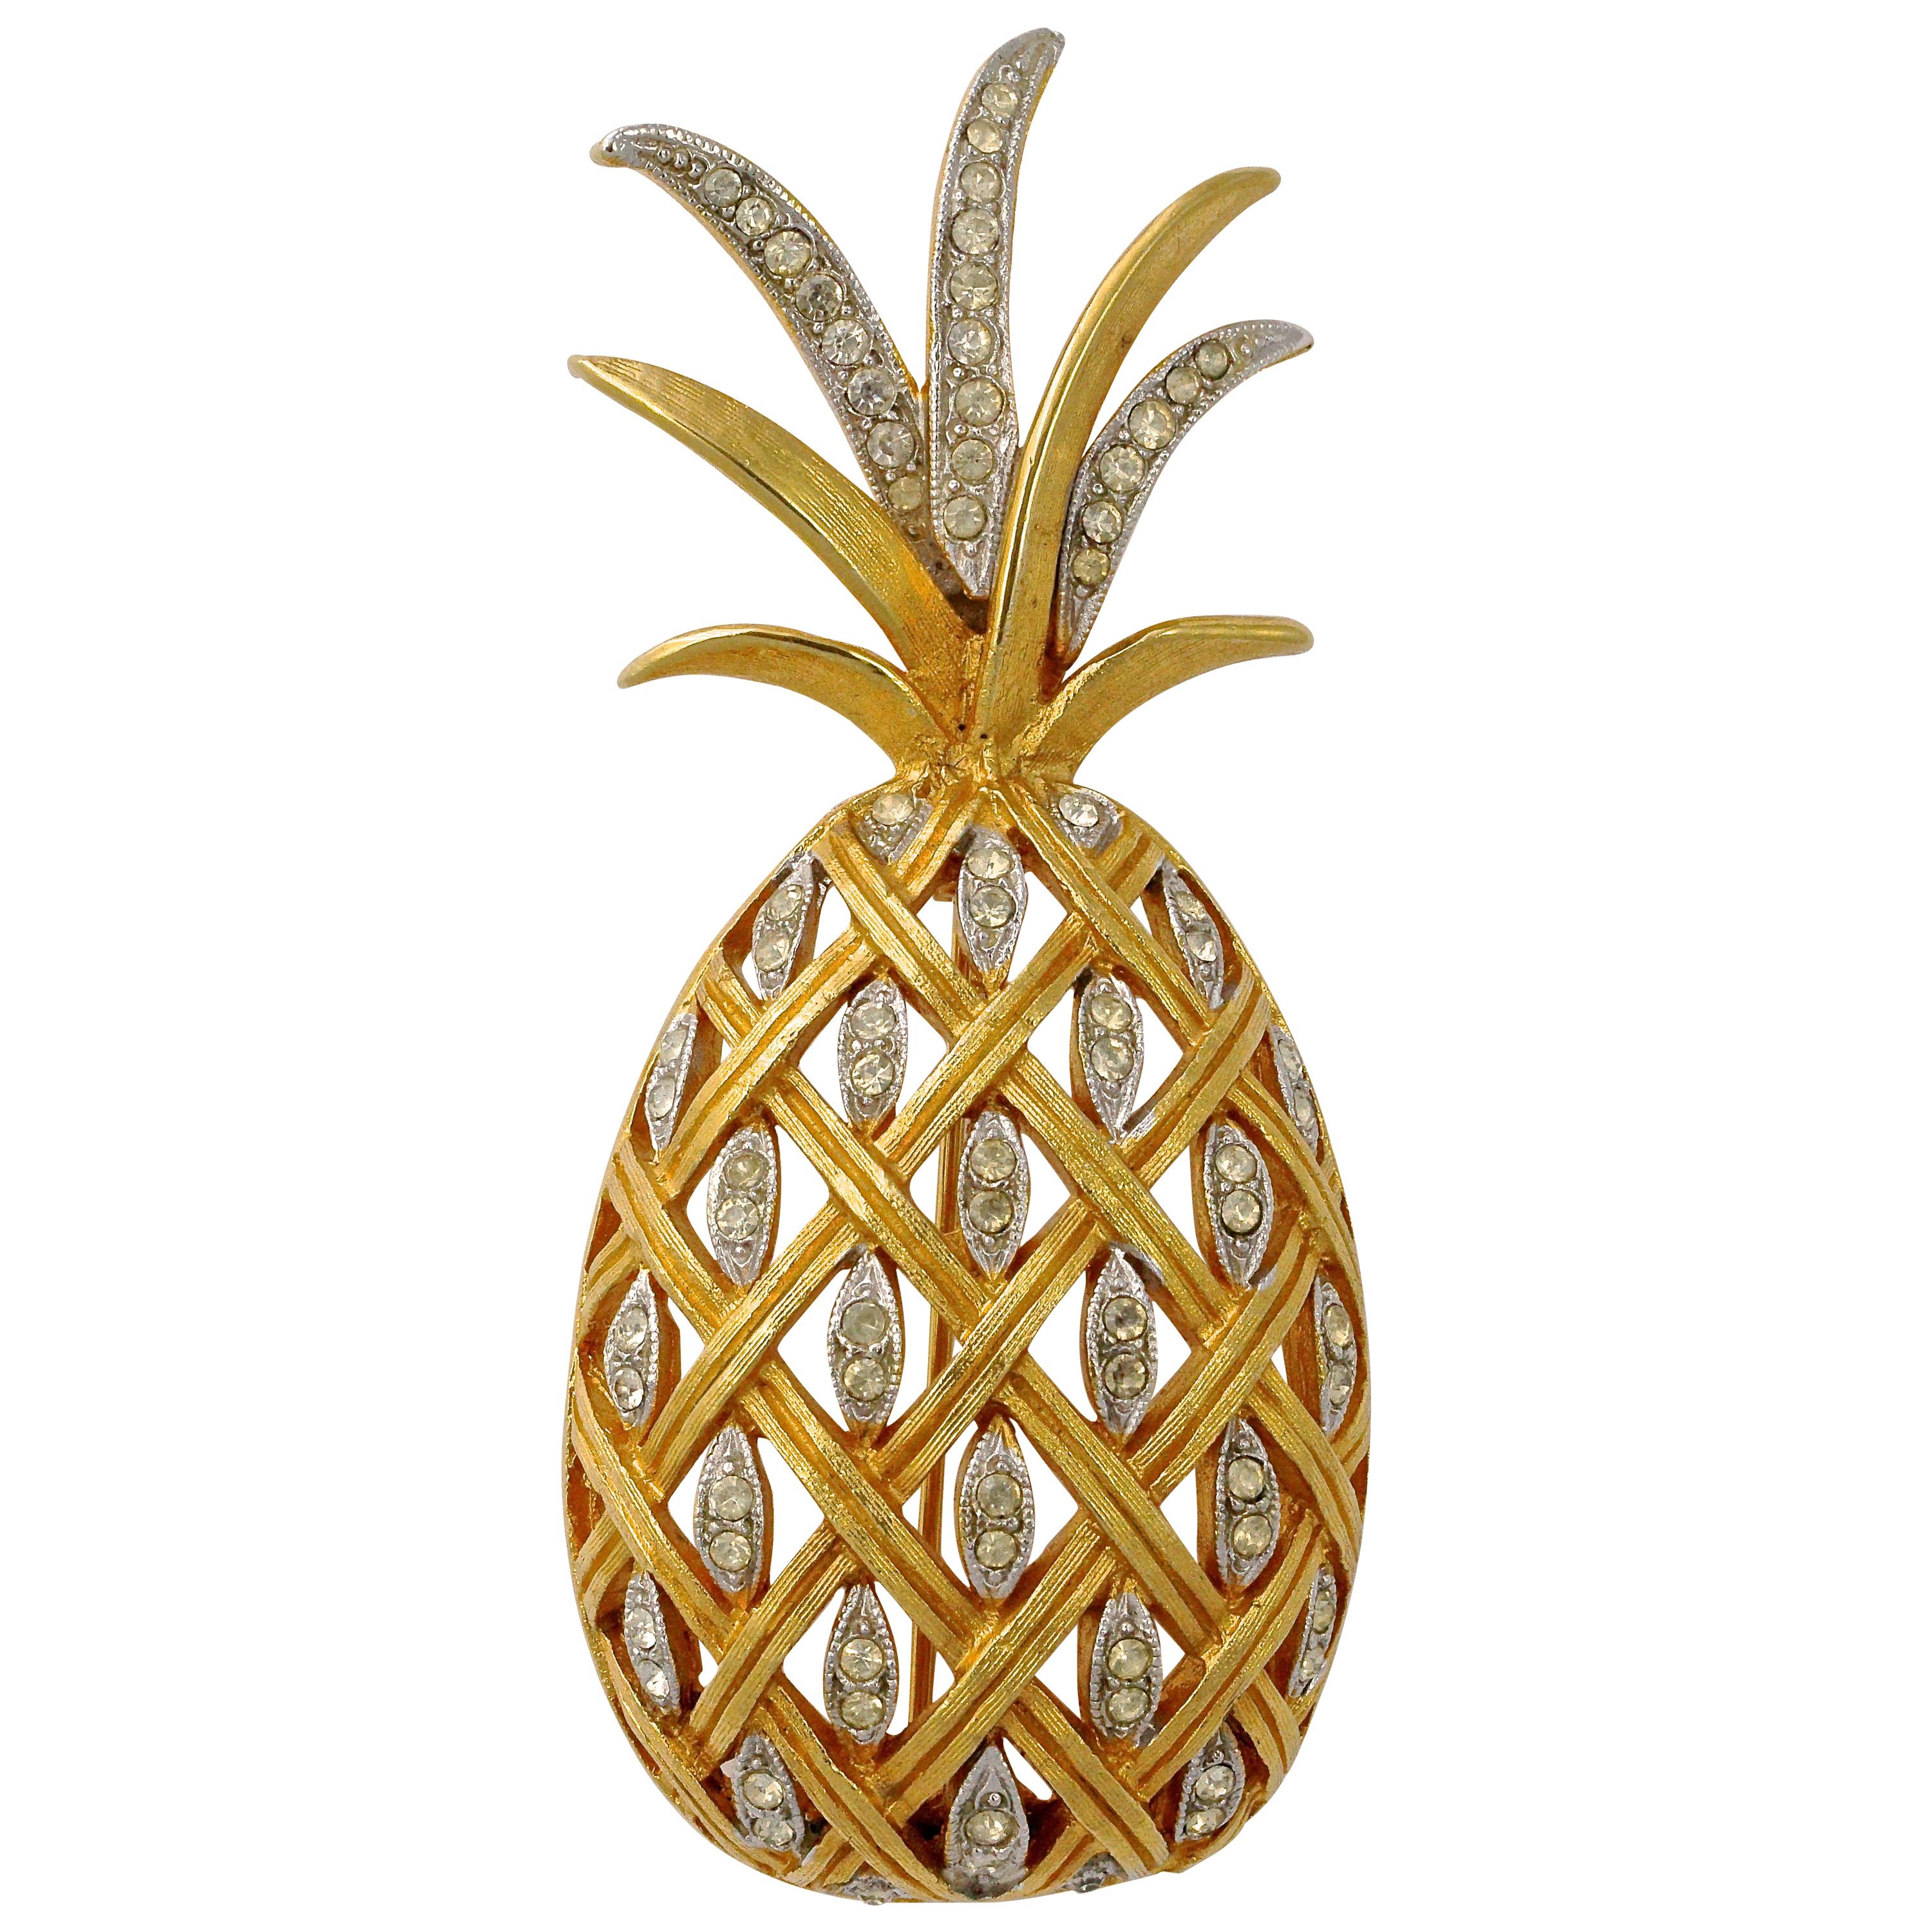 Vendome Gold Plated and Clear Rhinestones Pineapple Statement Brooch circa 1960s